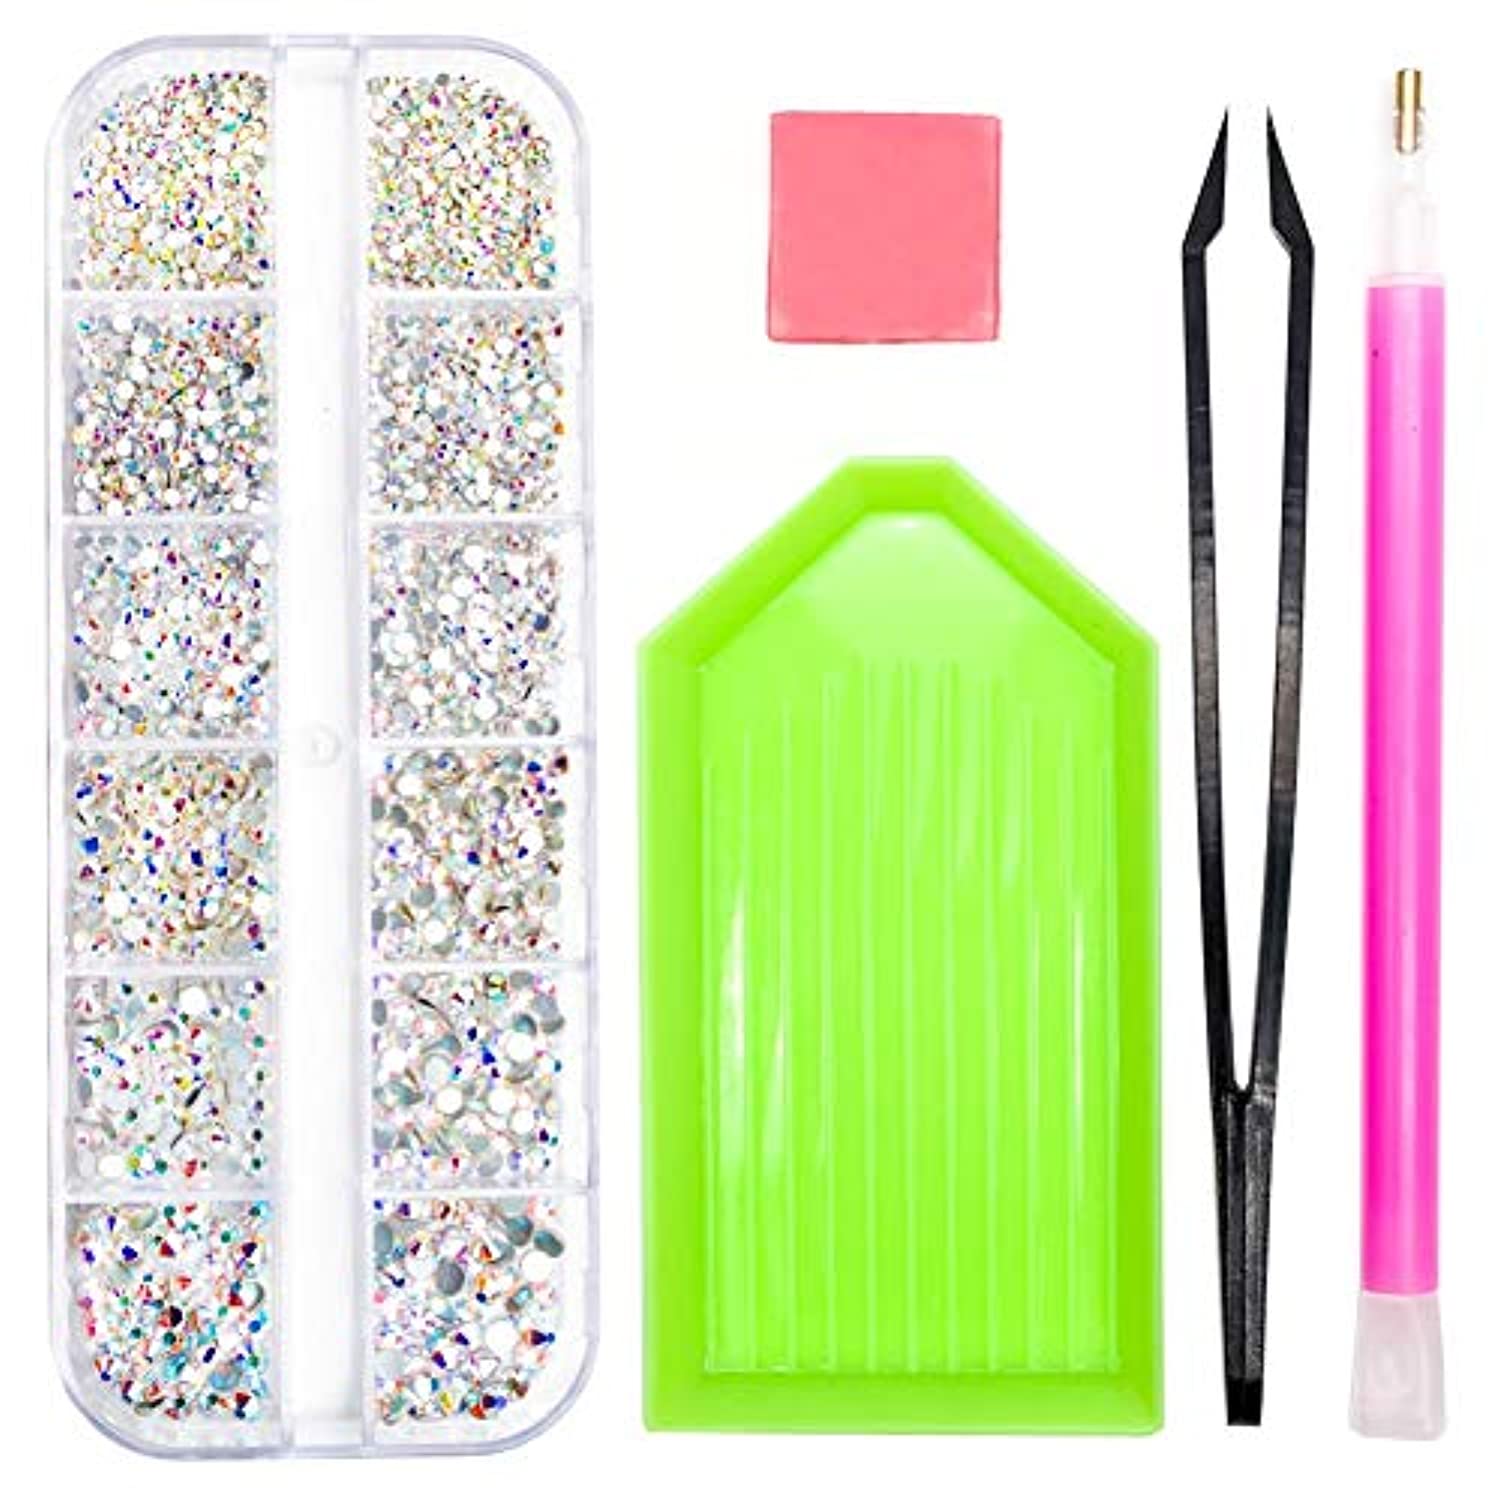 2320 Pieces Crystals Glass AB Nail Art Rhinestones, SS4/5/6/8/10/12 Mixed Nail Gems Stones, Flat Back Round Nail Diamonds with Storage Organizer Box/Picker Pencil/Tweezers for Face Clothes Shoes Decor